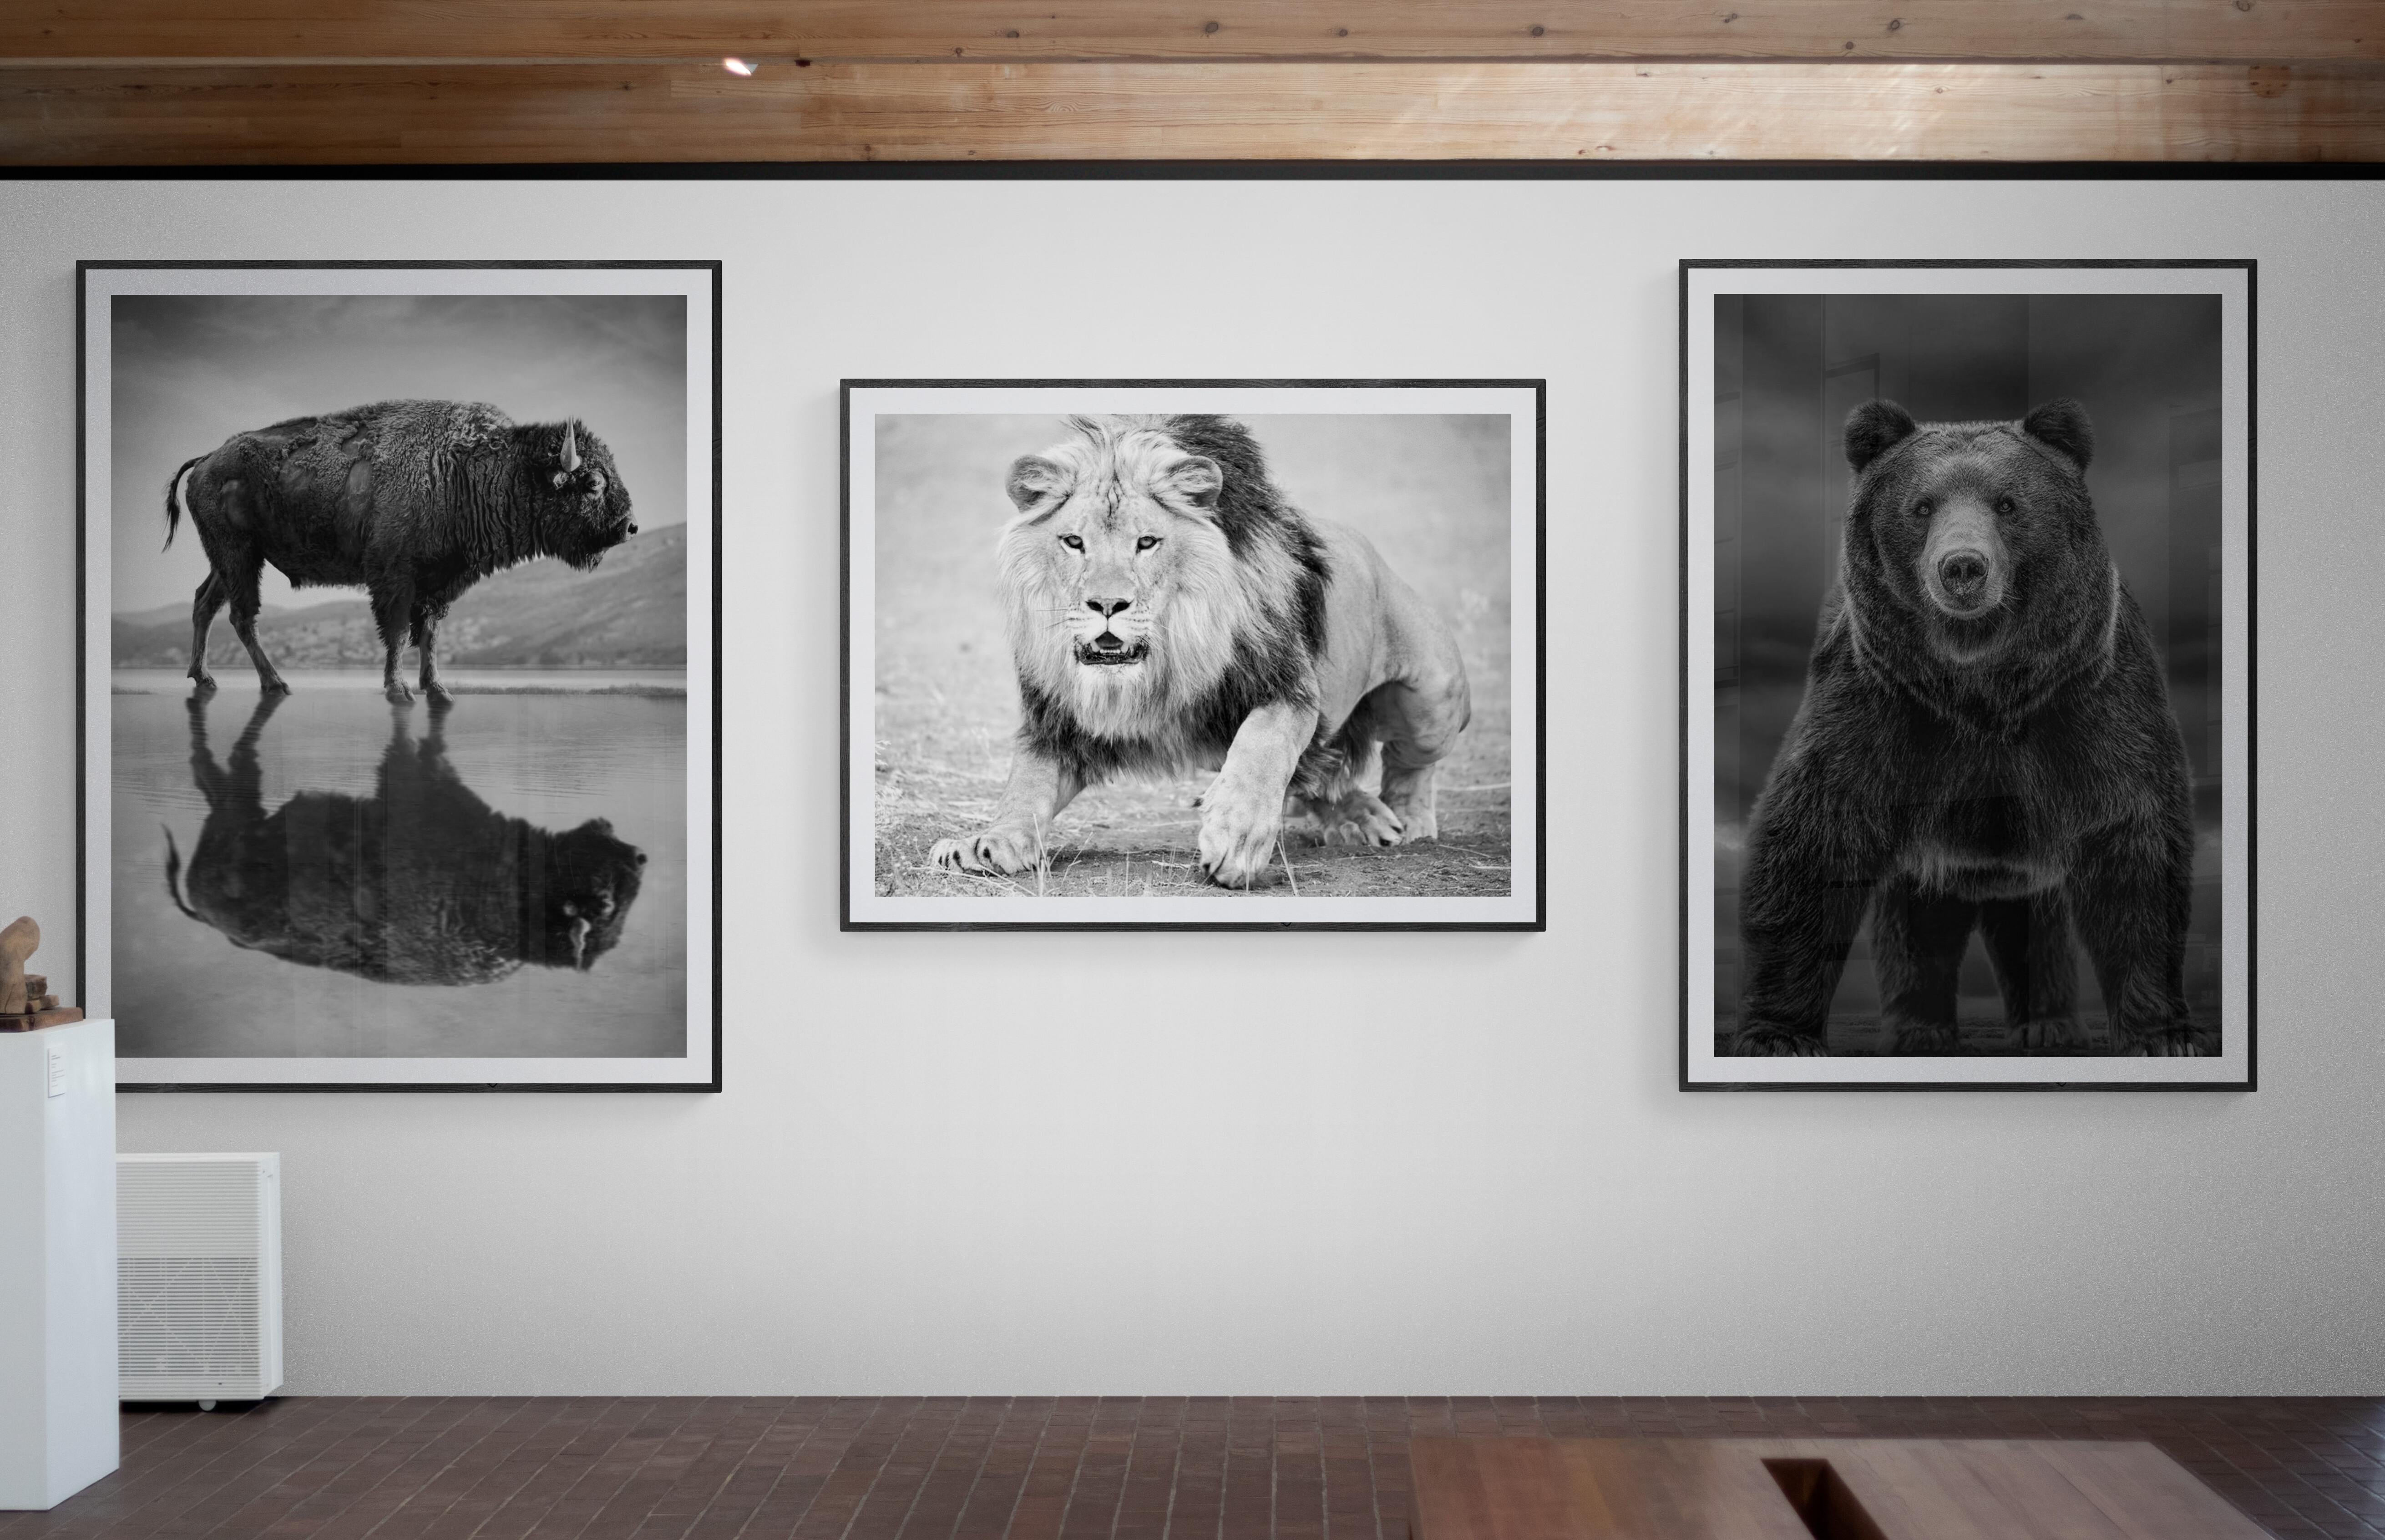 Times Like These 60x40 Black & White Photography, Kodiak, Bear Grizzly Unsigned  4